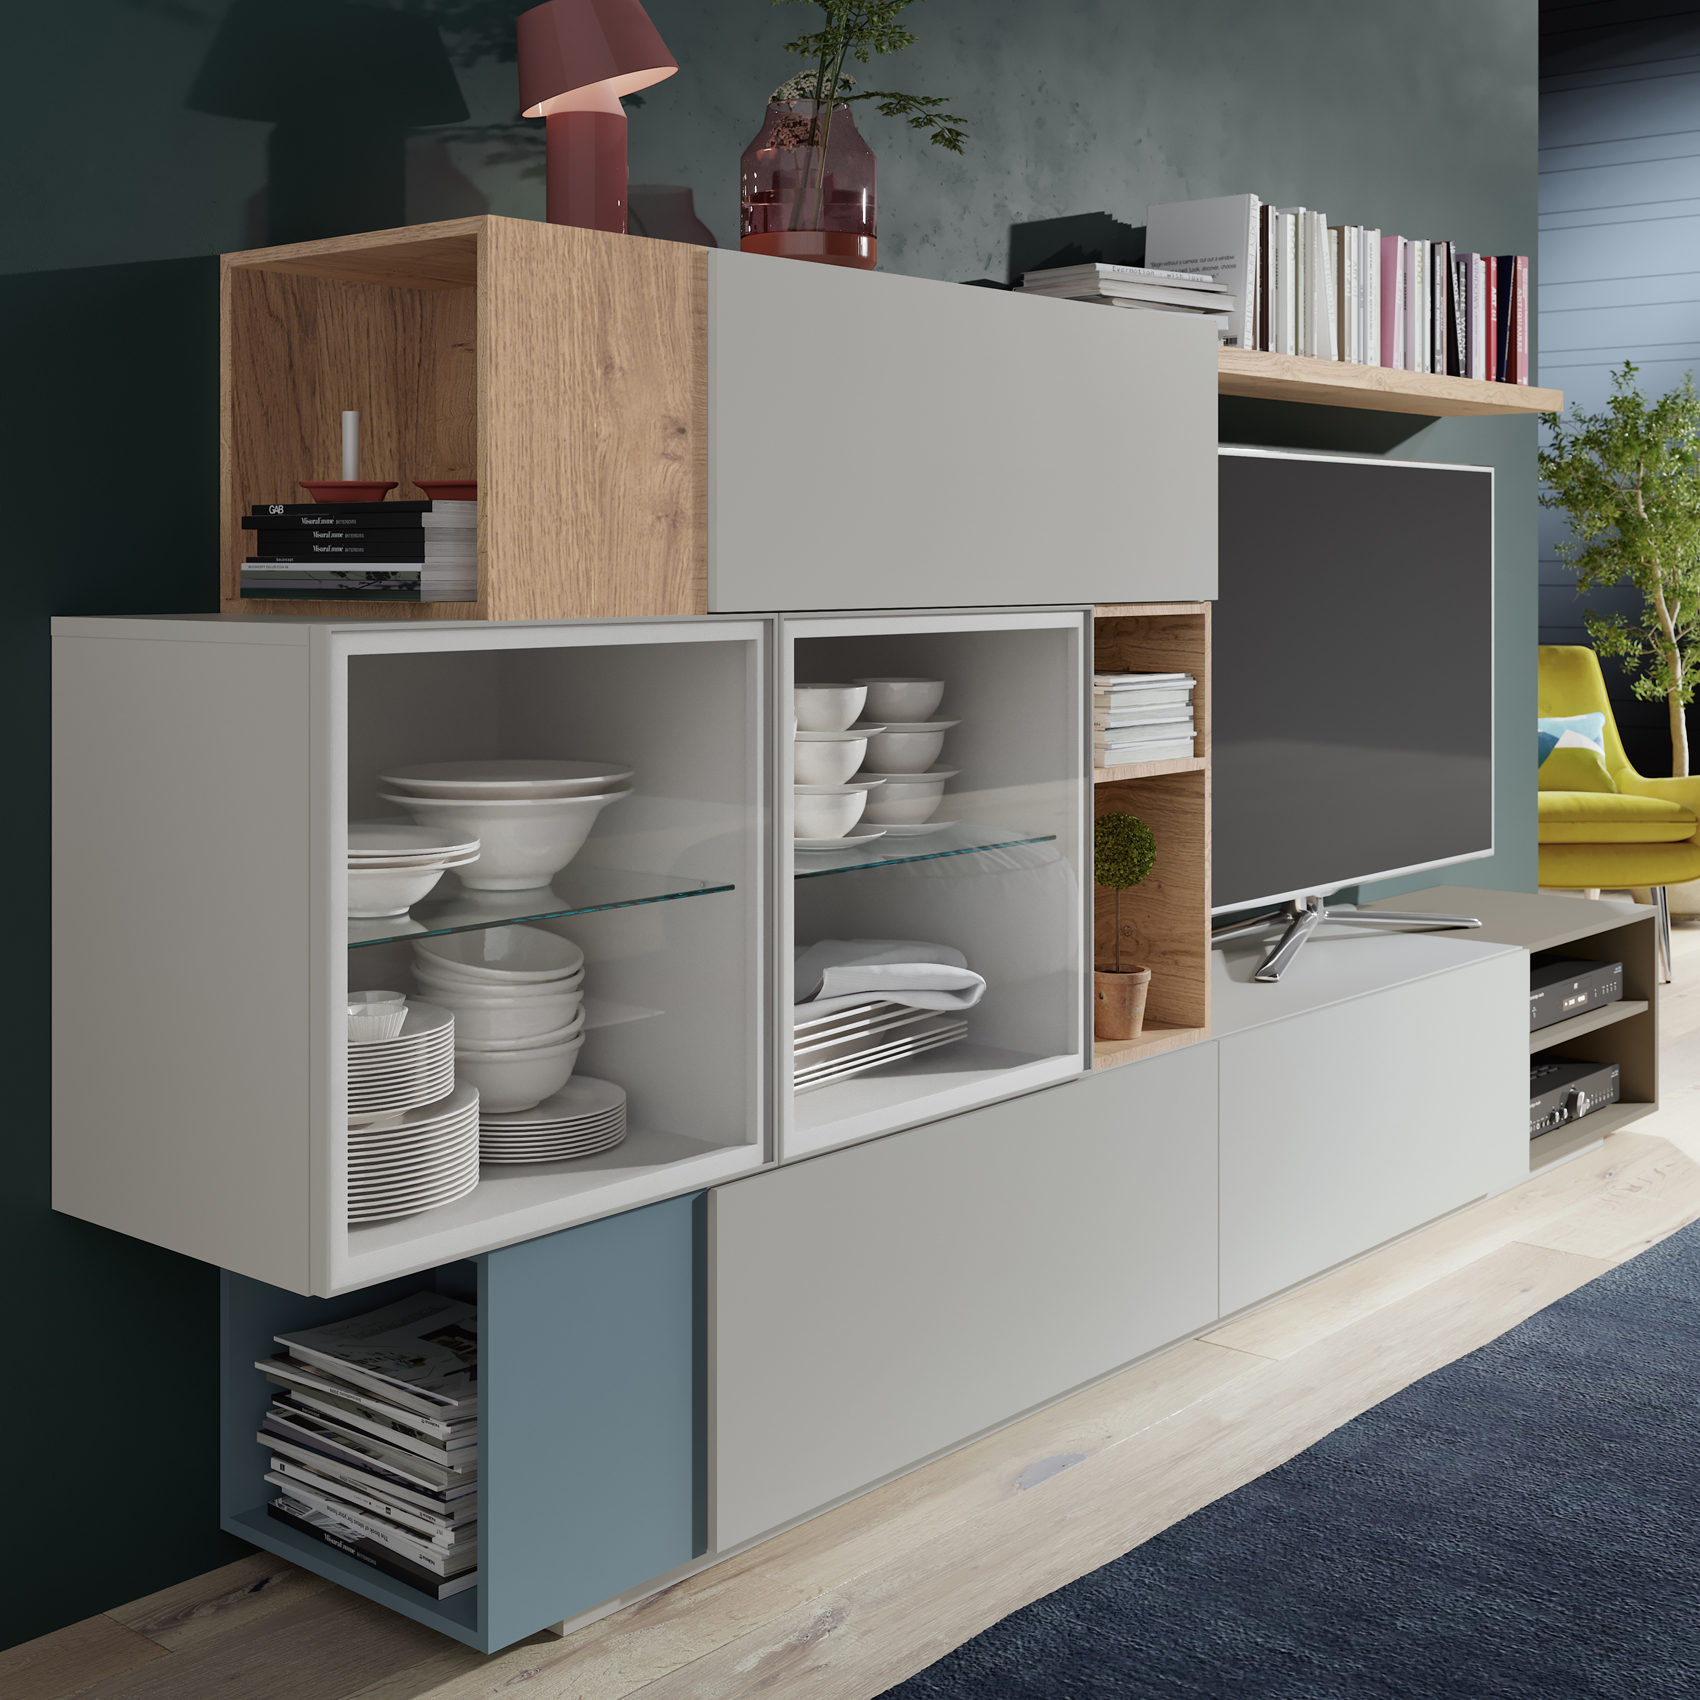 Contemporary Wall Unit for Any Interior